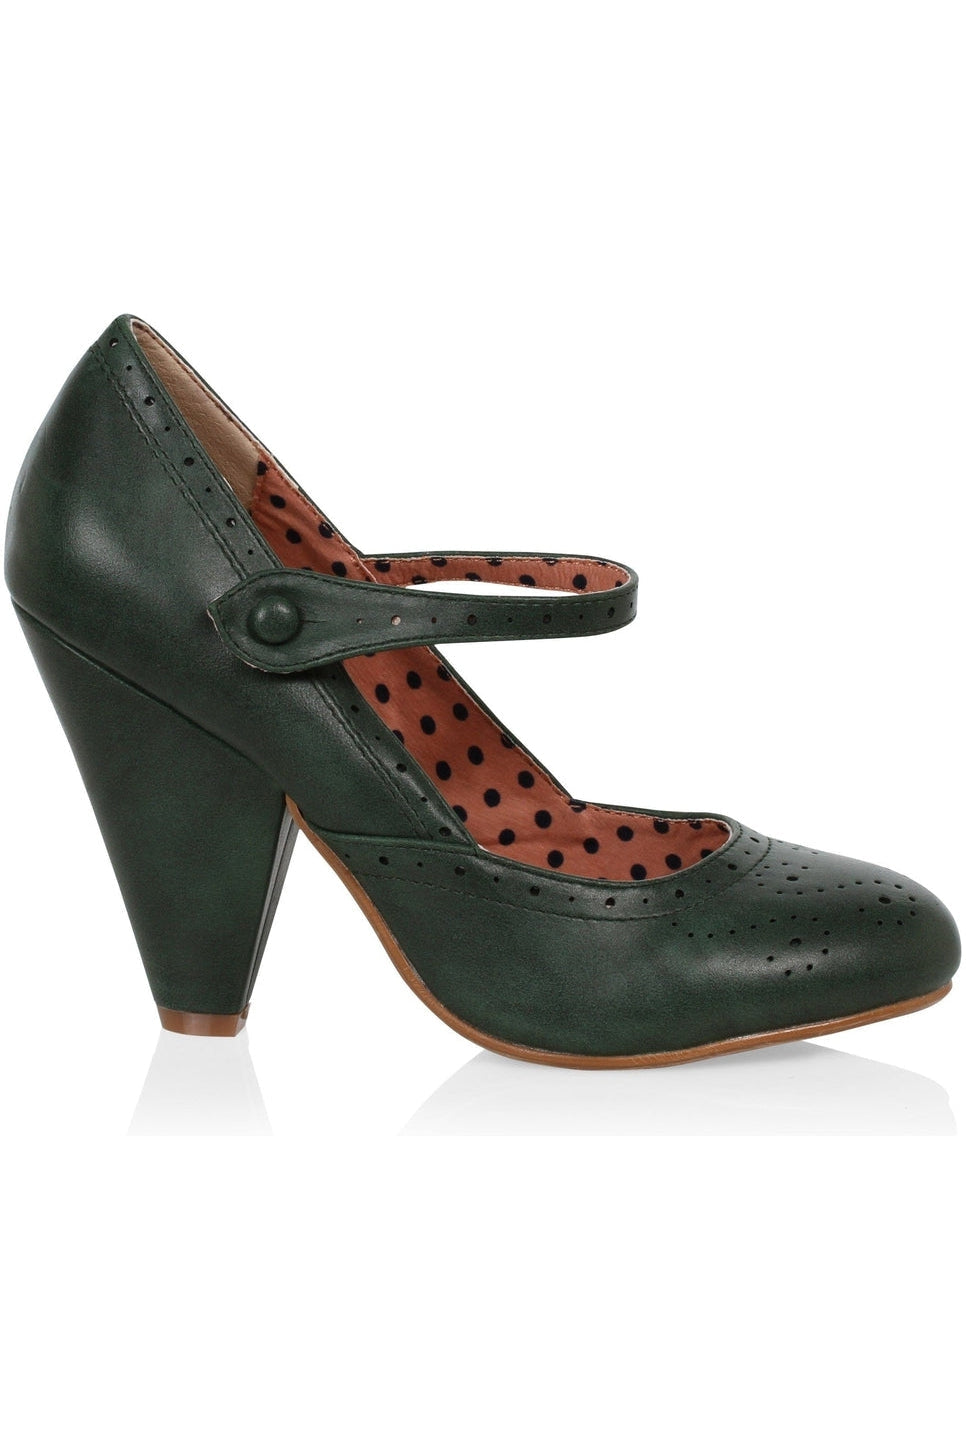 Stationær Profit Had Bettie Page Elanor Mary Jane | Green Faux Leather | Sexyshoes.com –  SEXYSHOES.COM